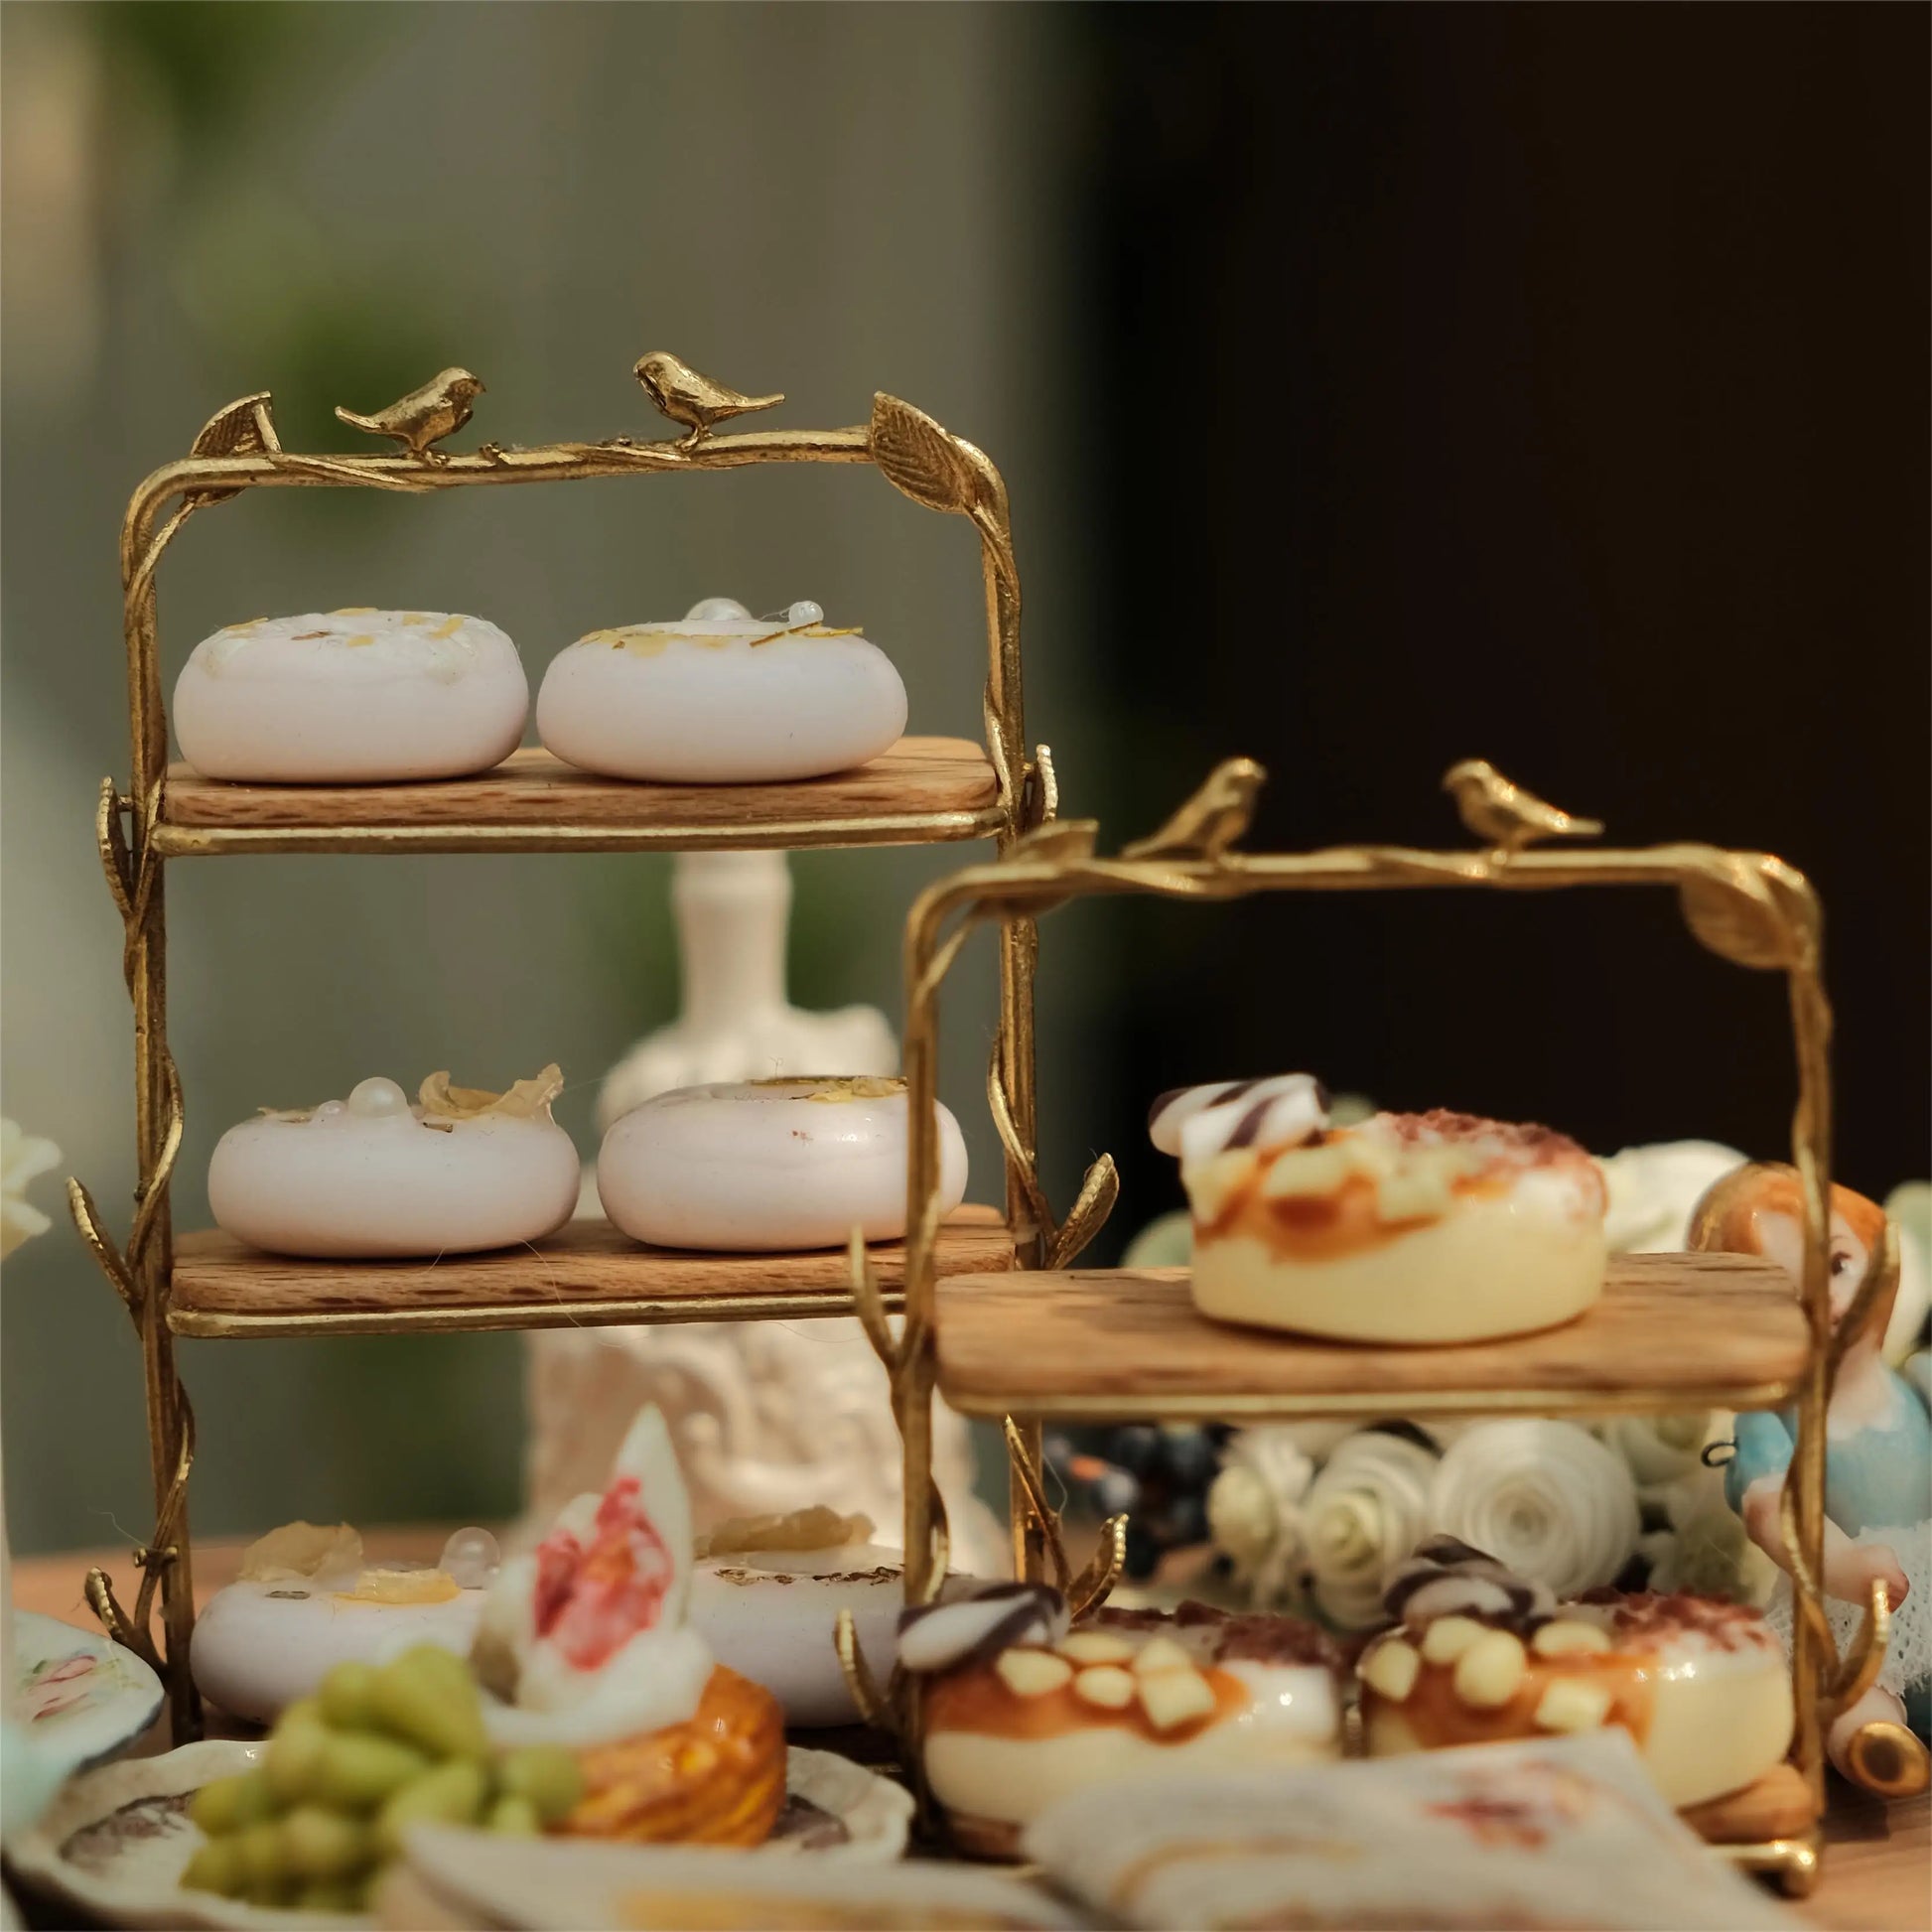 Dollhouse Furniture Accessories: Canary Dessert Rack & Miniature Kitchen Table Decor Toy for 1/6 Scale Models back piece in focus